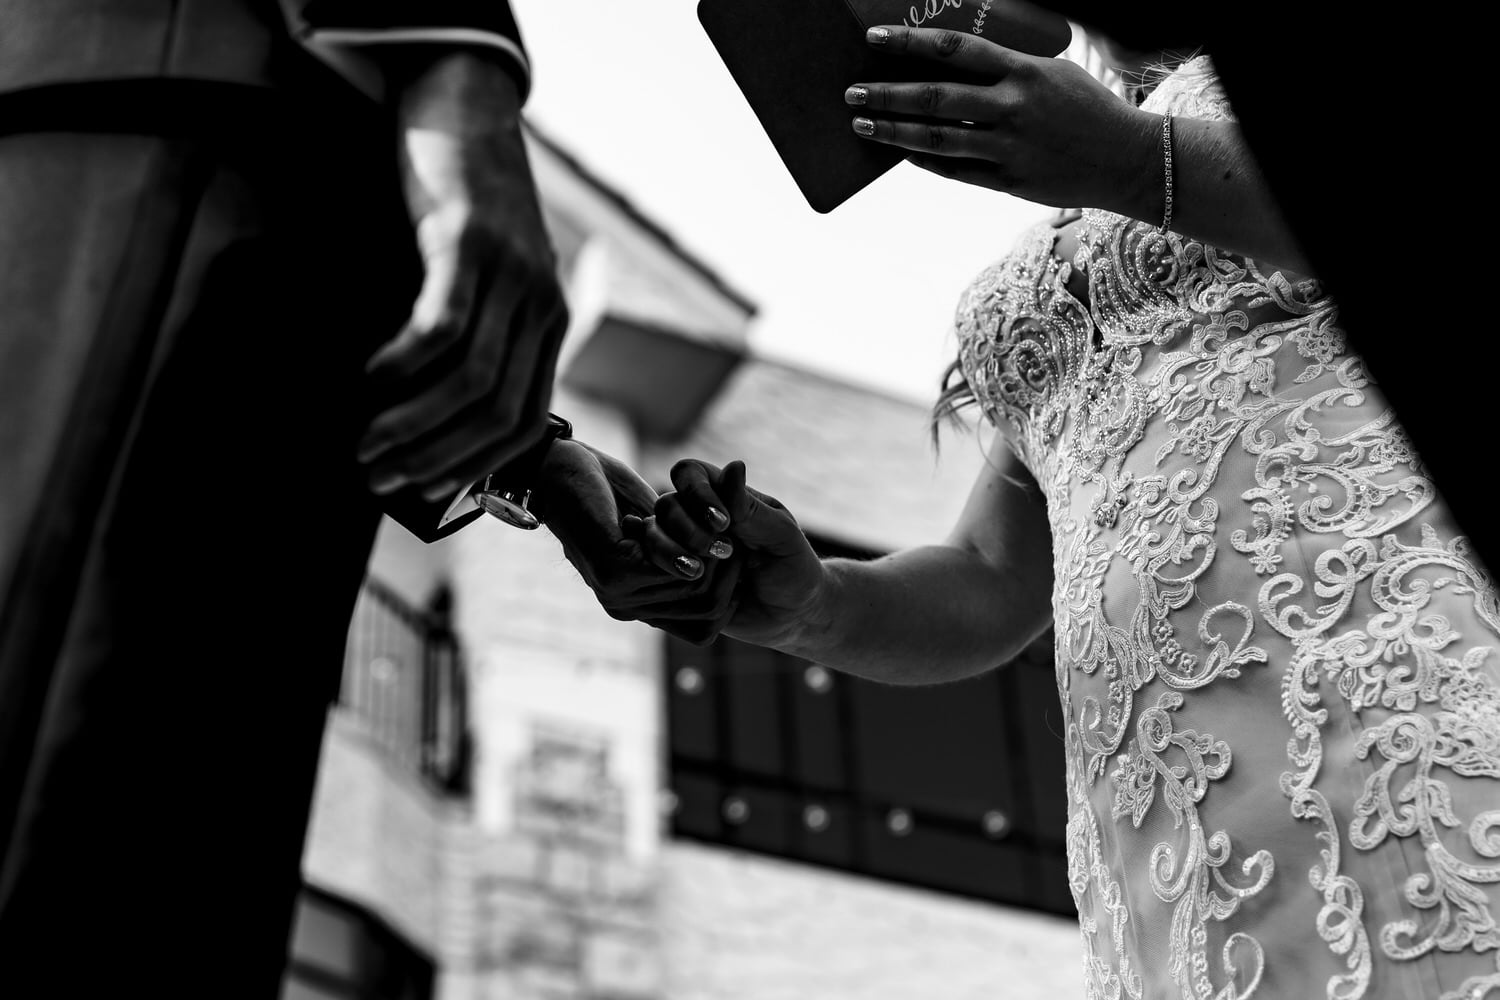 A candid black and white picture looking up as a bride and groom hold hands during their wedding ceremony as the bride reads her wedding vows to her groom. 